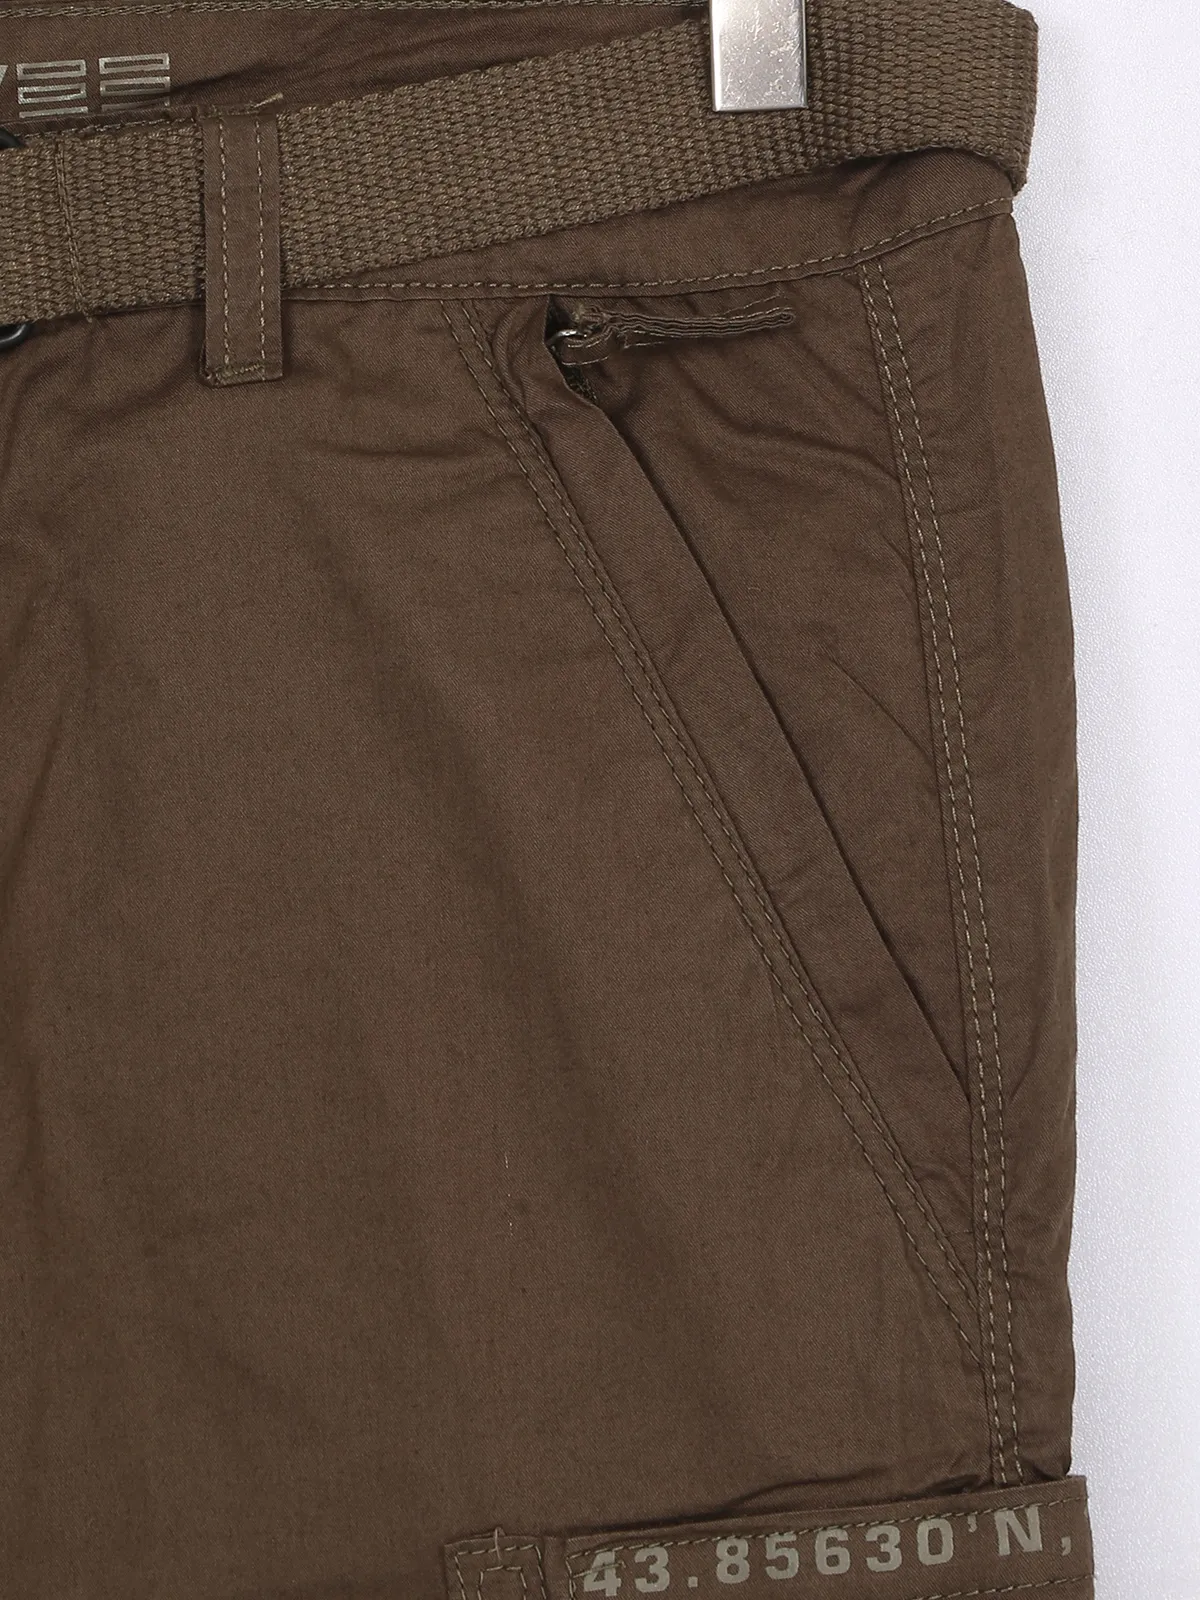 Beevee cotton brown solid shorts